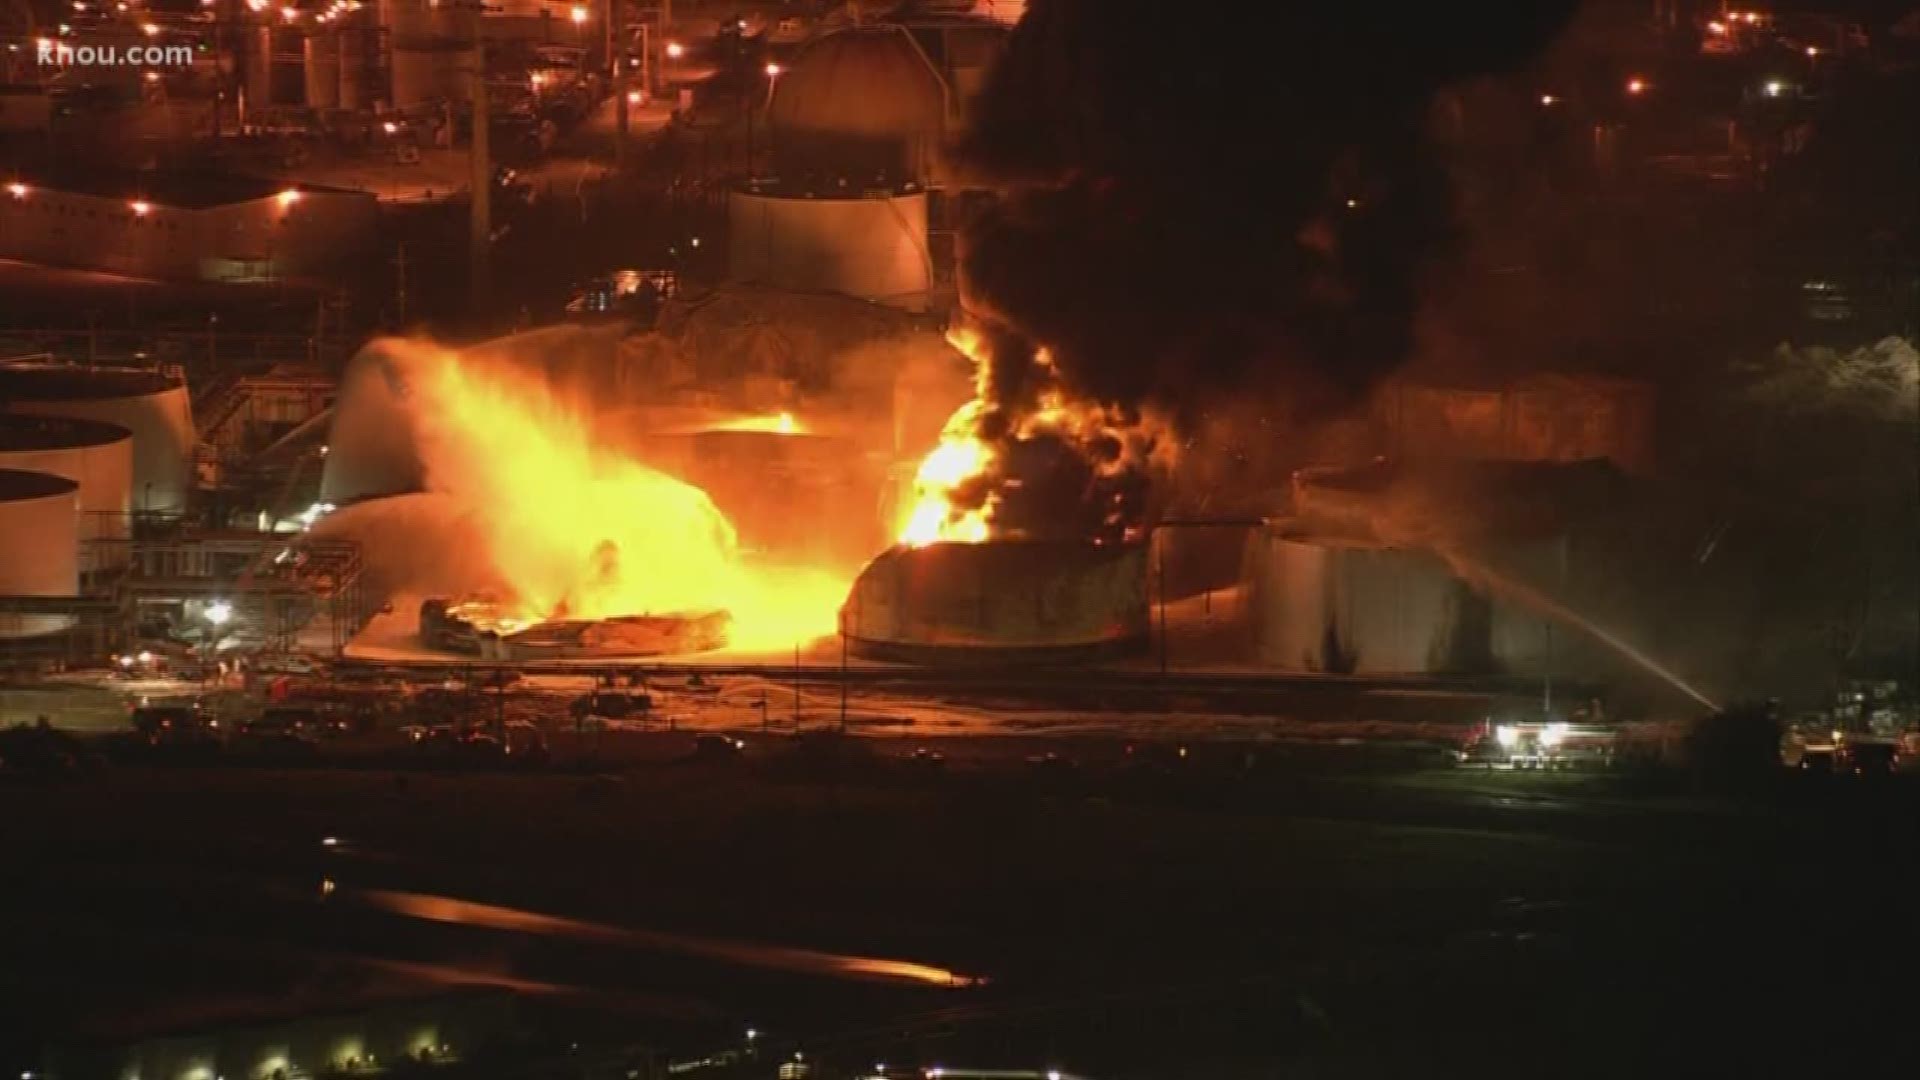 The chemical tank fire in Deer Park continued burning Tuesday night, well into its third day.